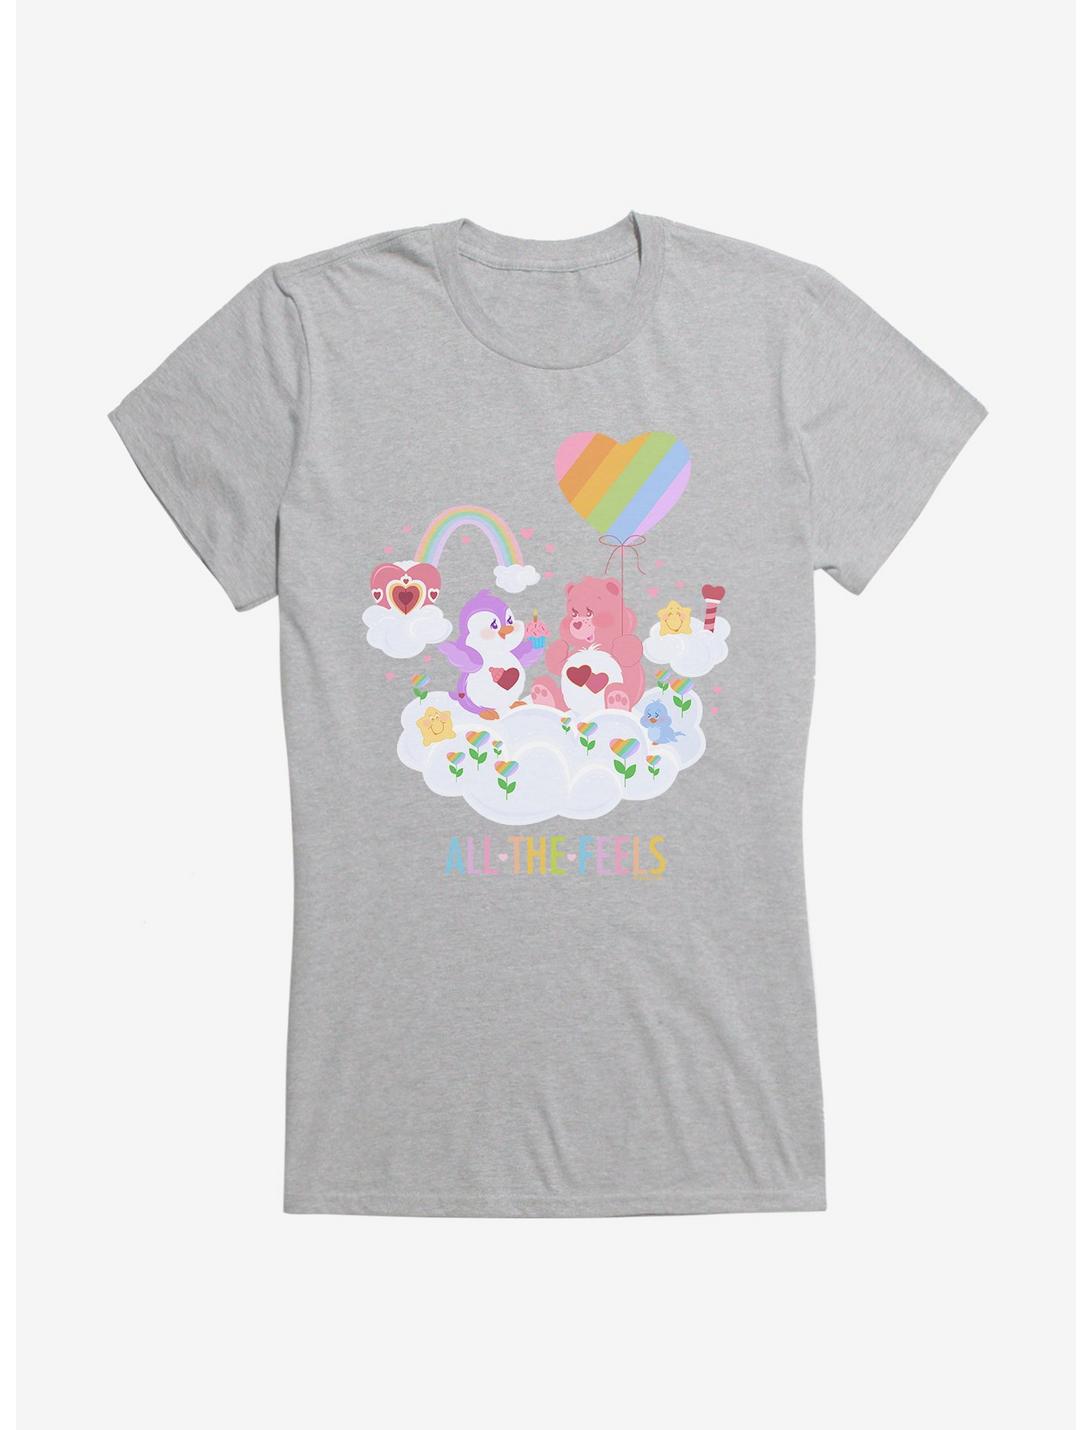 Care Bears All The Feels Heart Girls T-Shirt, HEATHER, hi-res